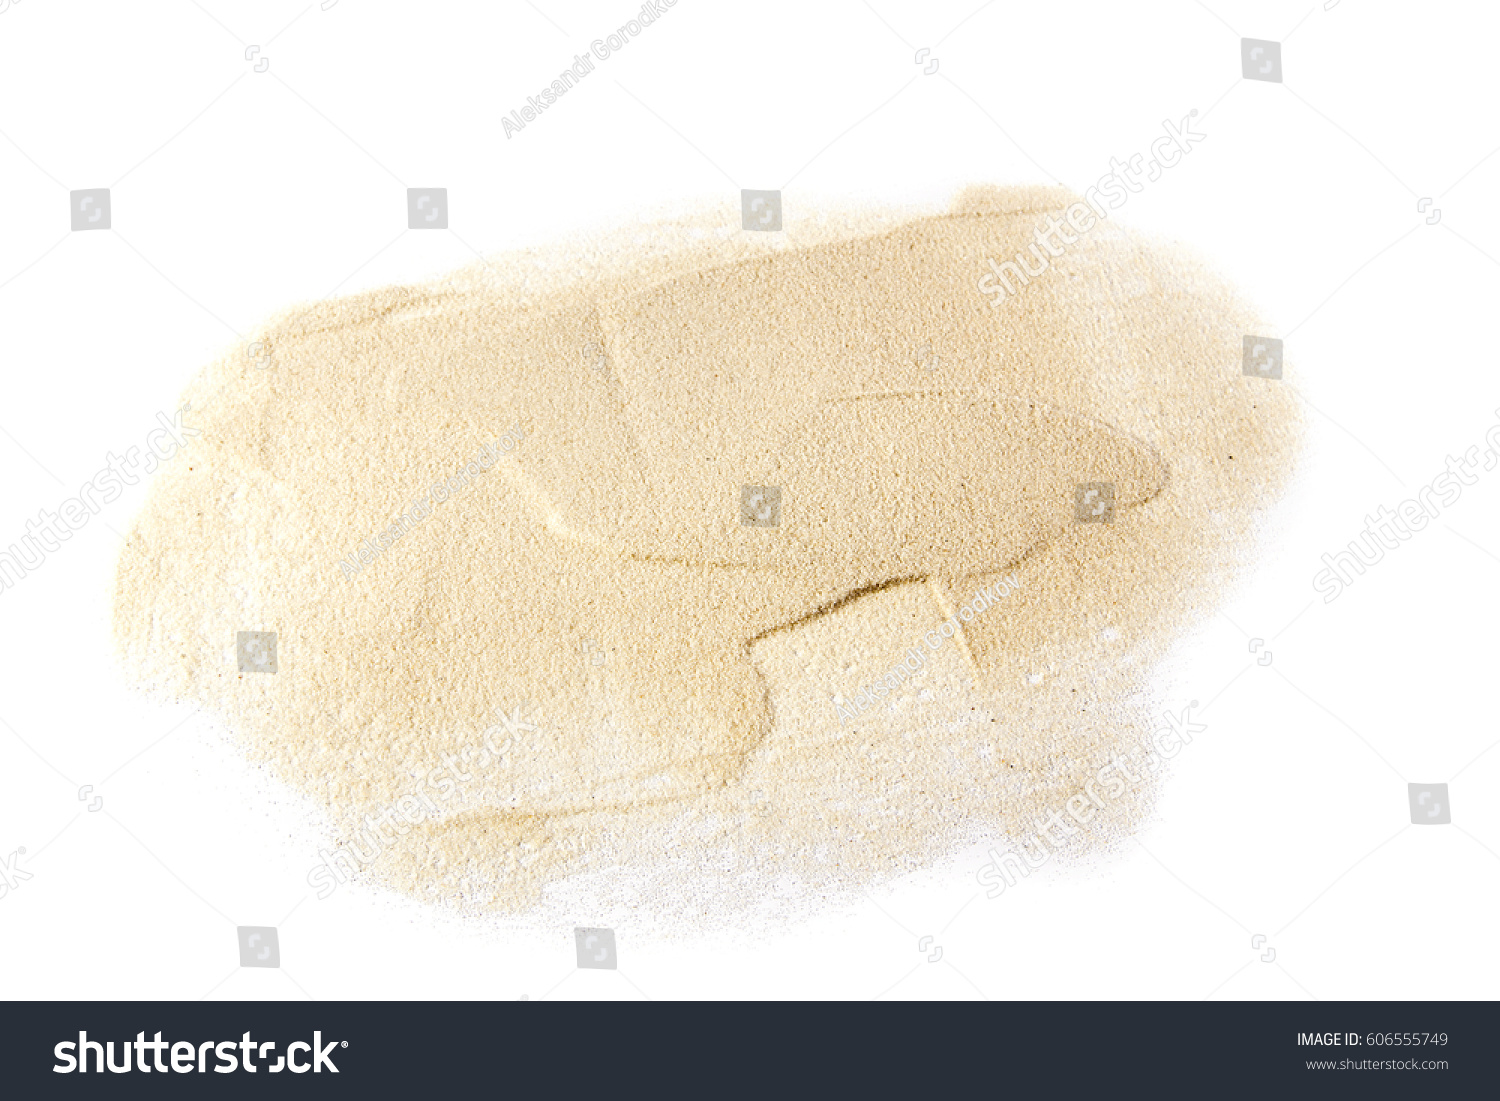 Sand for title #606555749